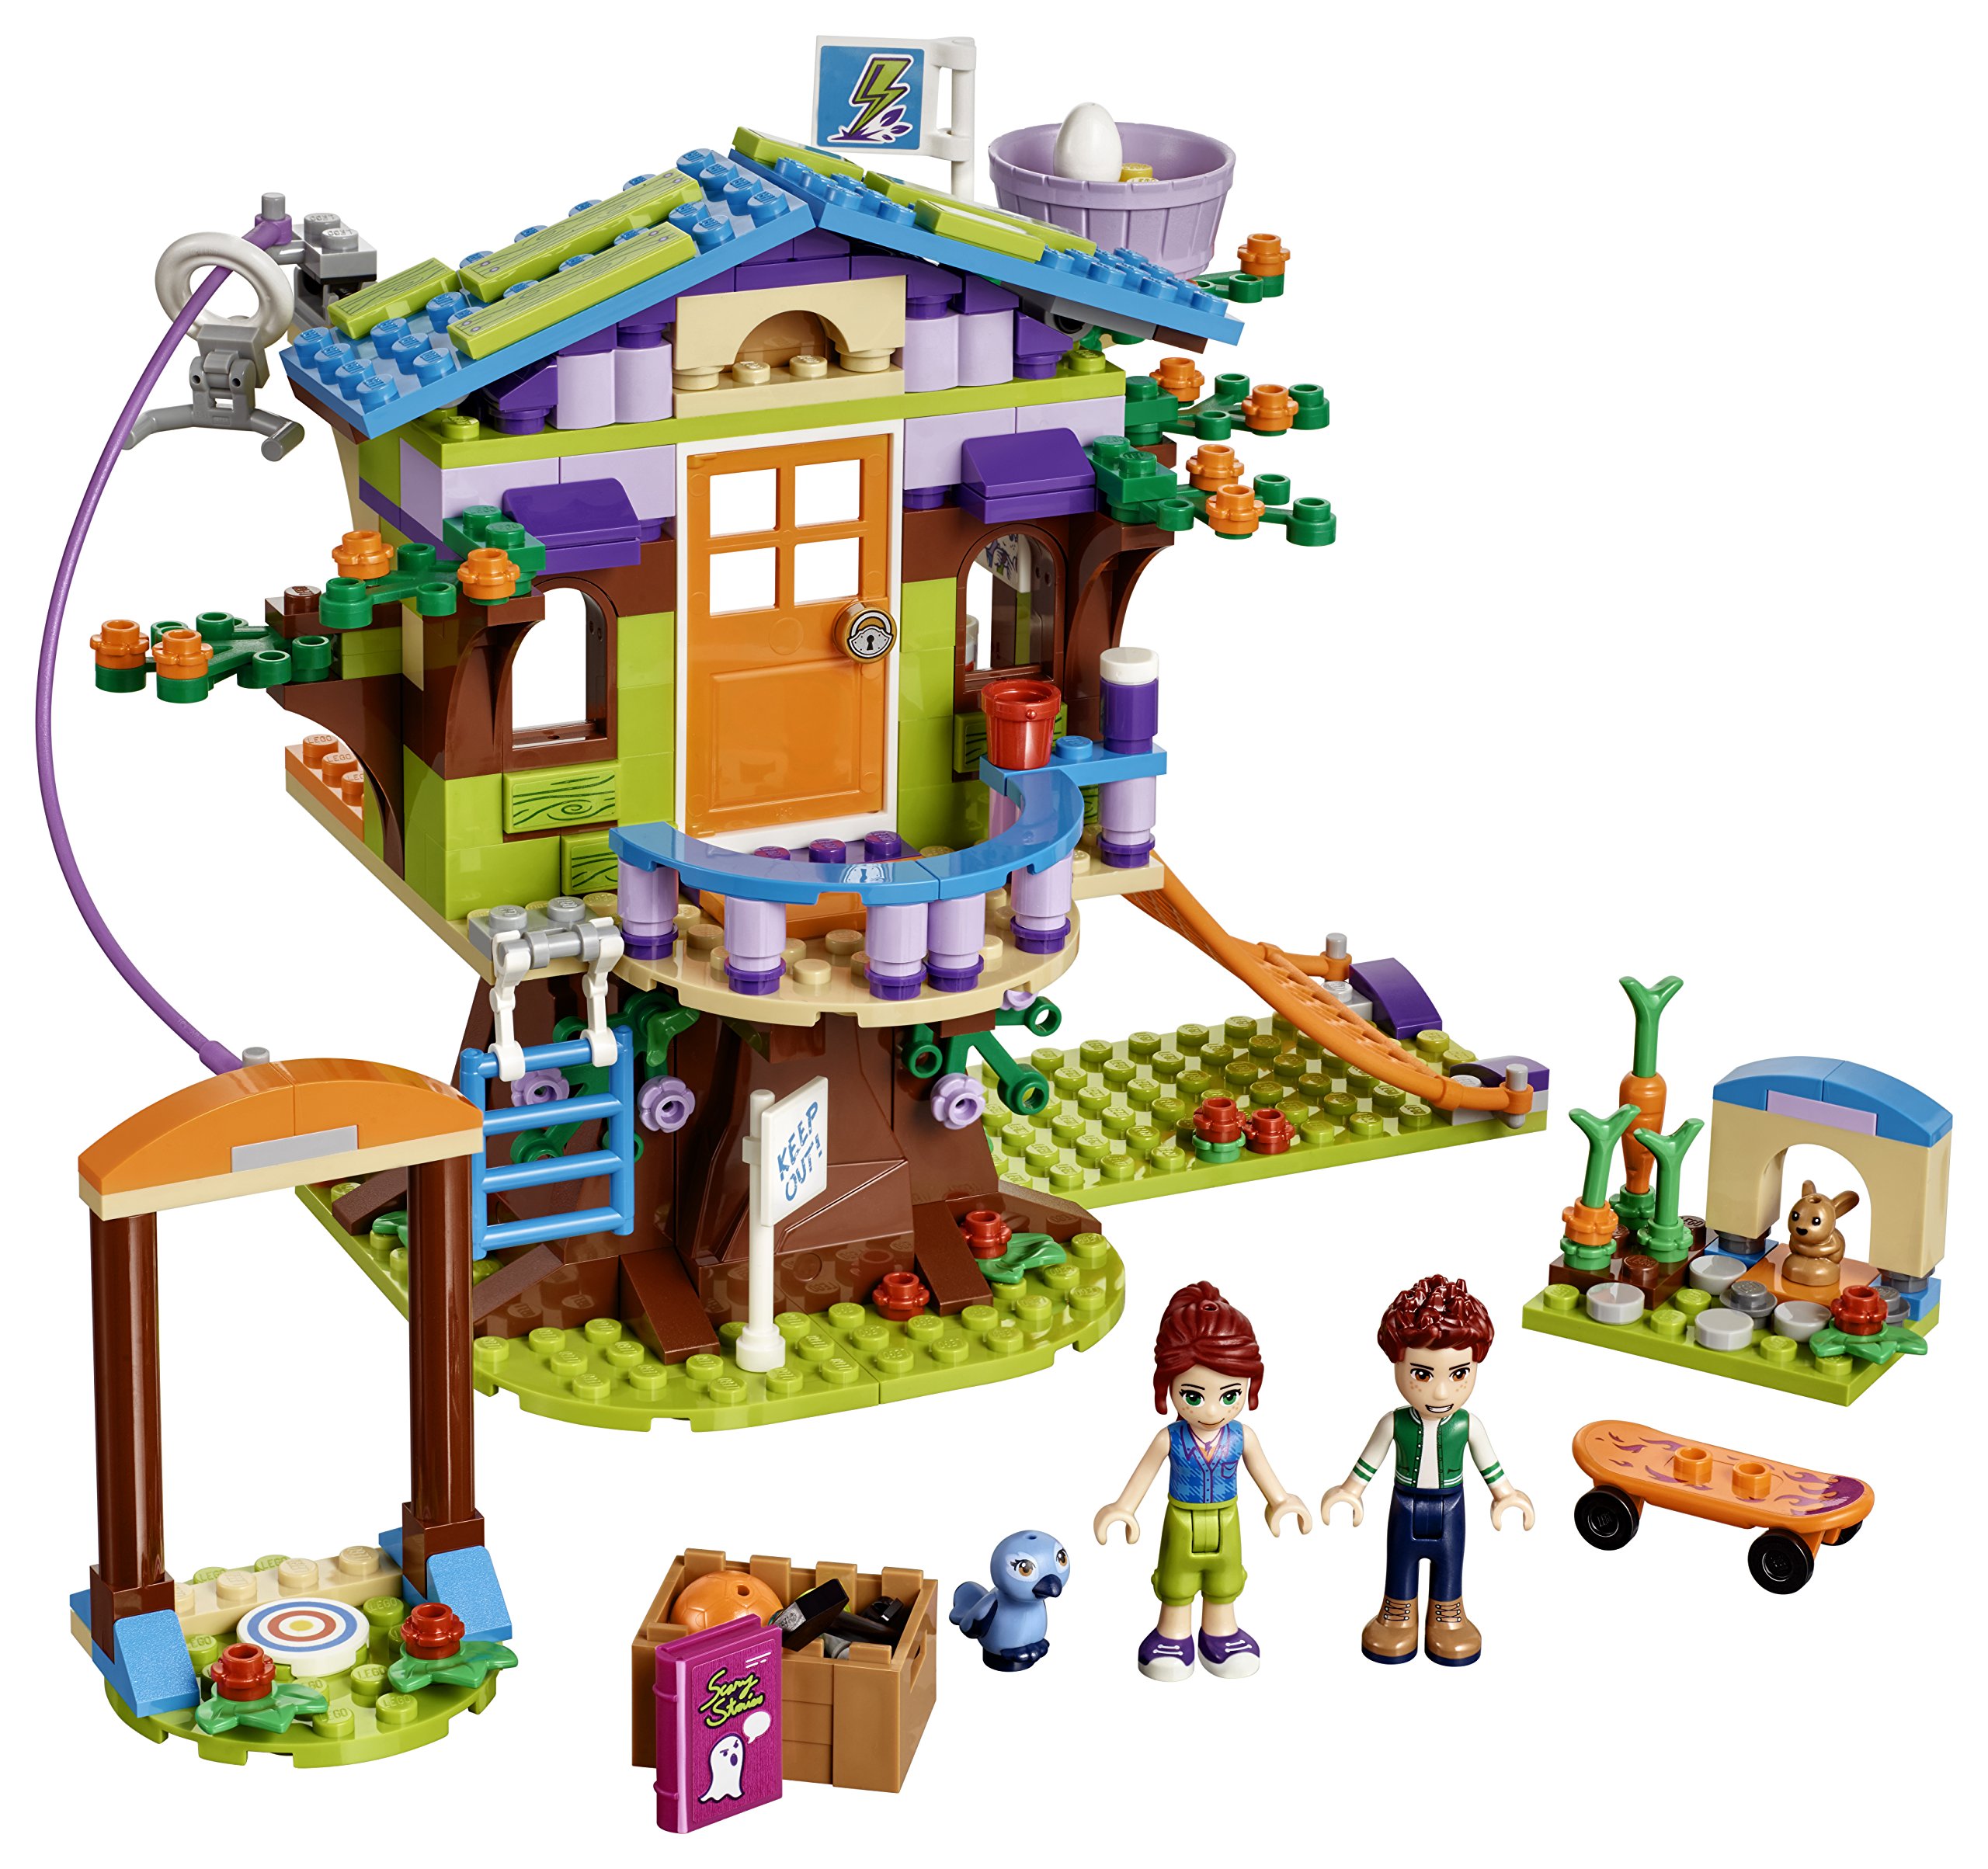 LEGO Friends Mia's Tree House 41335 Creative Building Toy Set for Kids, Best Learning and Roleplay Gift for Girls and Boys (351 Pieces)